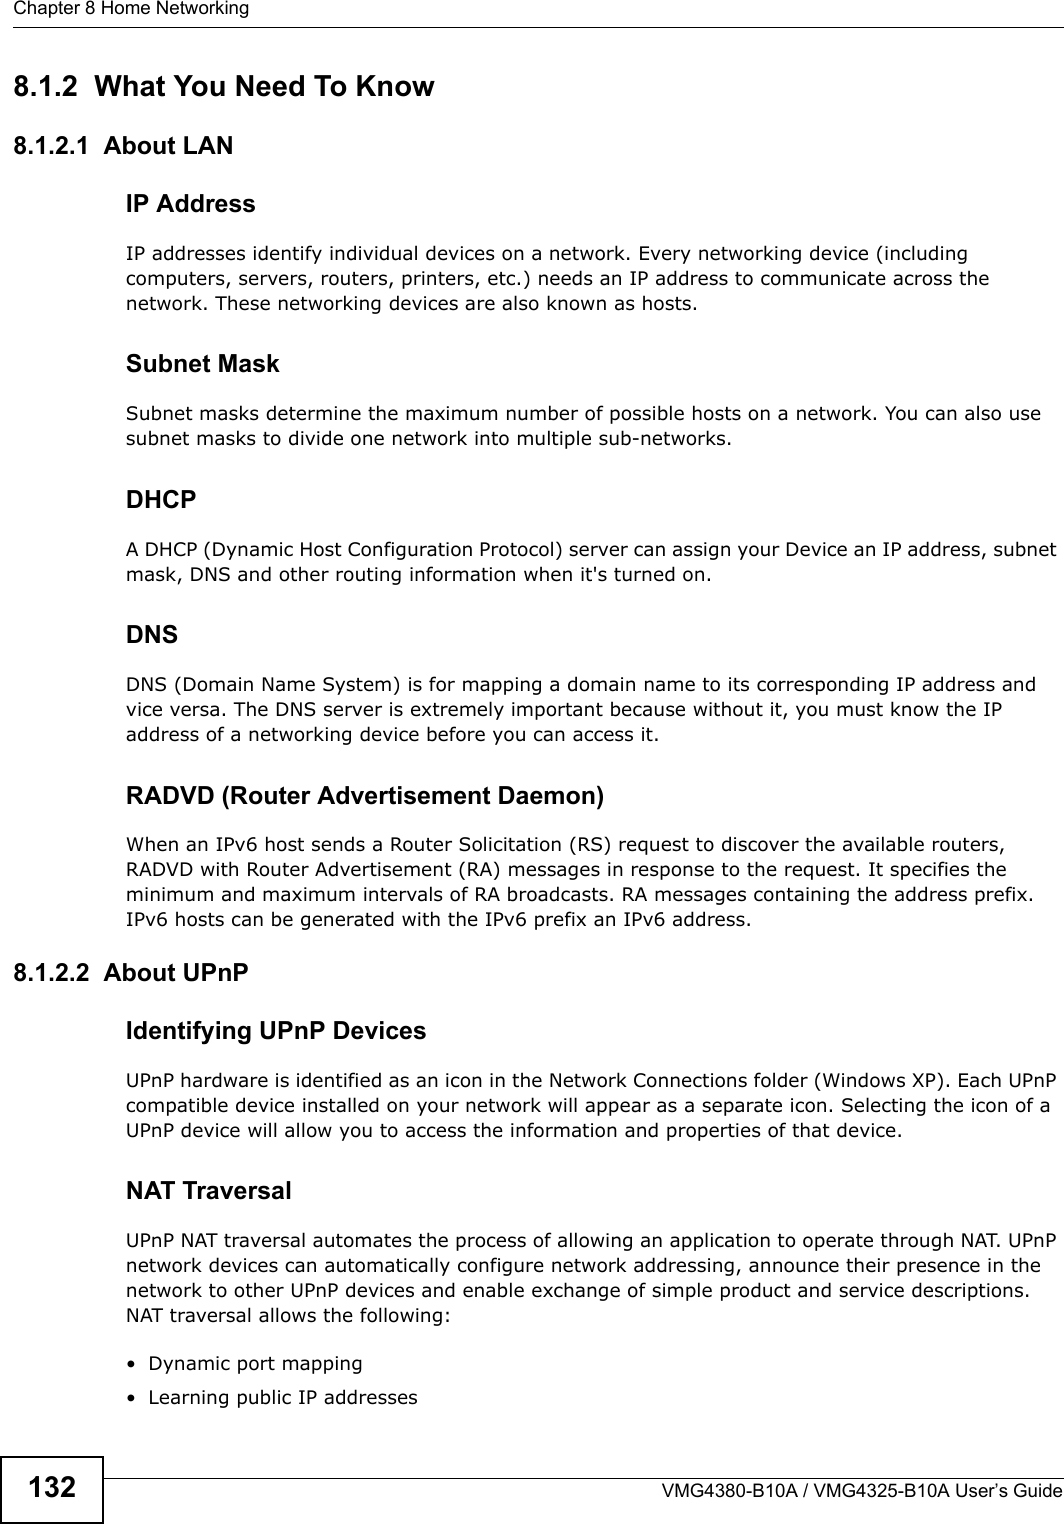 Chapter 8 Home NetworkingVMG4380-B10A / VMG4325-B10A User’s Guide1328.1.2  What You Need To Know8.1.2.1  About LANIP AddressIP addresses identify individual devices on a network. Every networking device (including computers, servers, routers, printers, etc.) needs an IP address to communicate across thenetwork. These networking devices are also known as hosts.Subnet MaskSubnet masks determine the maximum number of possible hosts on a network. You can also use subnet masks to divide one network into multiple sub-networks.DHCPA DHCP (Dynamic Host Configuration Protocol) server can assign your Device an IP address, subnet mask, DNS and other routing information when it&apos;s turned on.DNSDNS (Domain Name System) is for mapping a domain name to its corresponding IP address and vice versa. The DNS server is extremely important because without it, you must know the IP address of a networking device before you can access it.RADVD (Router Advertisement Daemon)When an IPv6 host sends a Router Solicitation (RS) request to discover the available routers, RADVD with Router Advertisement (RA) messages in response to the request. It specifies the minimum and maximum intervals of RA broadcasts. RA messages containing the address prefix. IPv6 hosts can be generated with the IPv6 prefix an IPv6 address.8.1.2.2  About UPnPIdentifying UPnP DevicesUPnP hardware is identified as an icon in the Network Connections folder (Windows XP). Each UPnPcompatible device installed on your network will appear as a separate icon. Selecting the icon of a UPnP device will allow you to access the information and properties of that device. NAT TraversalUPnP NAT traversal automates the process of allowing an application to operate through NAT. UPnP network devices can automatically configure network addressing, announce their presence in the network to other UPnP devices and enable exchange of simple product and service descriptions. NAT traversal allows the following:• Dynamic port mapping• Learning public IP addresses